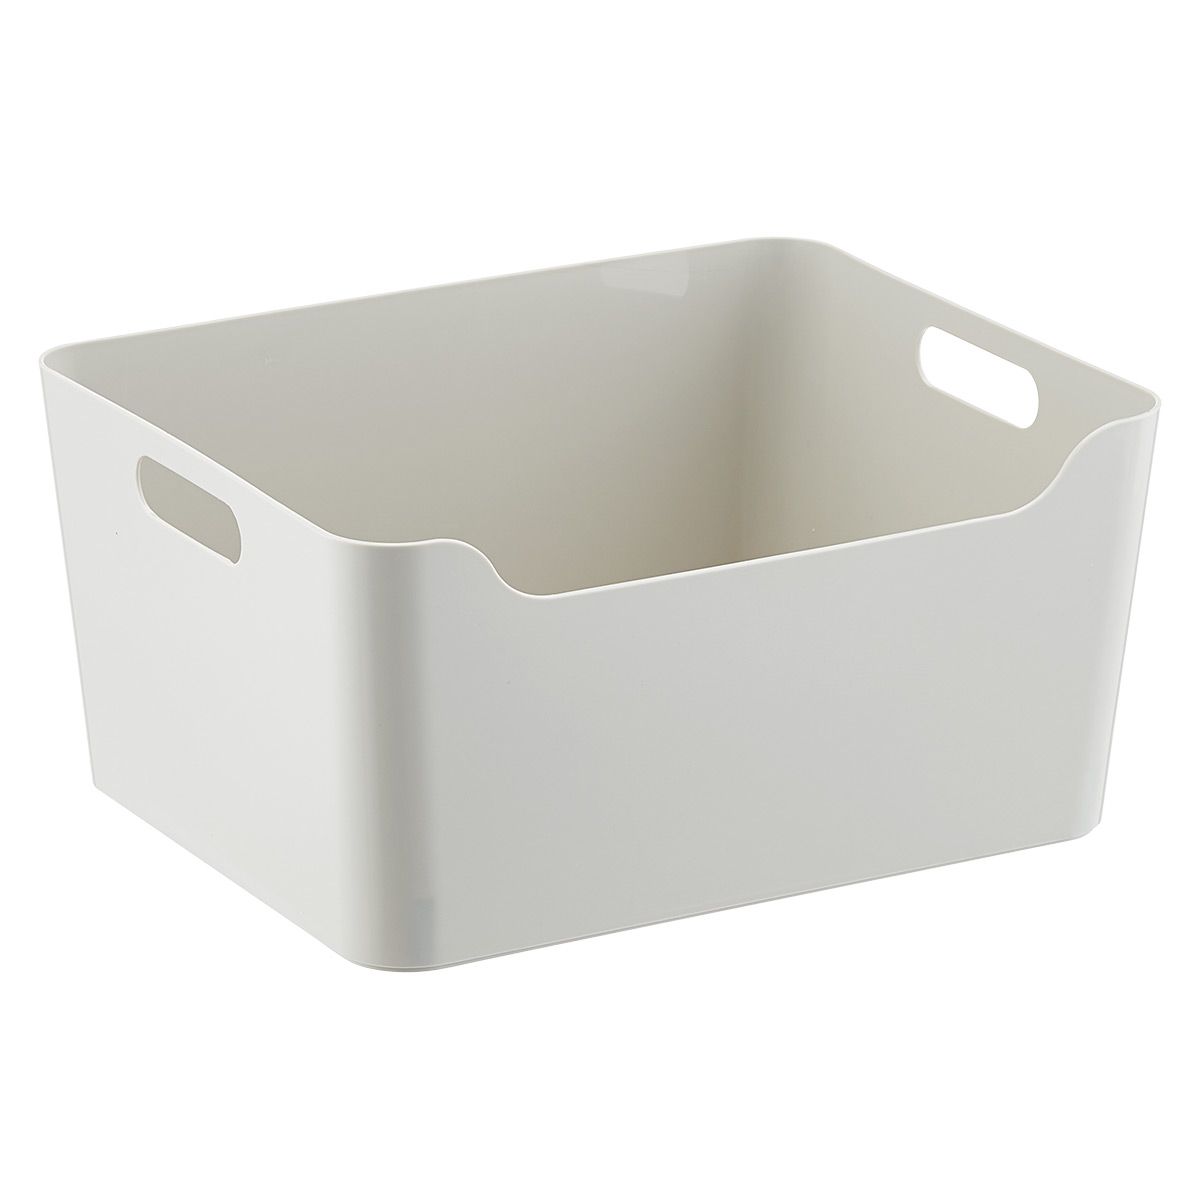 Large Plastic Storage Bin w/ Handles Light Grey | The Container Store